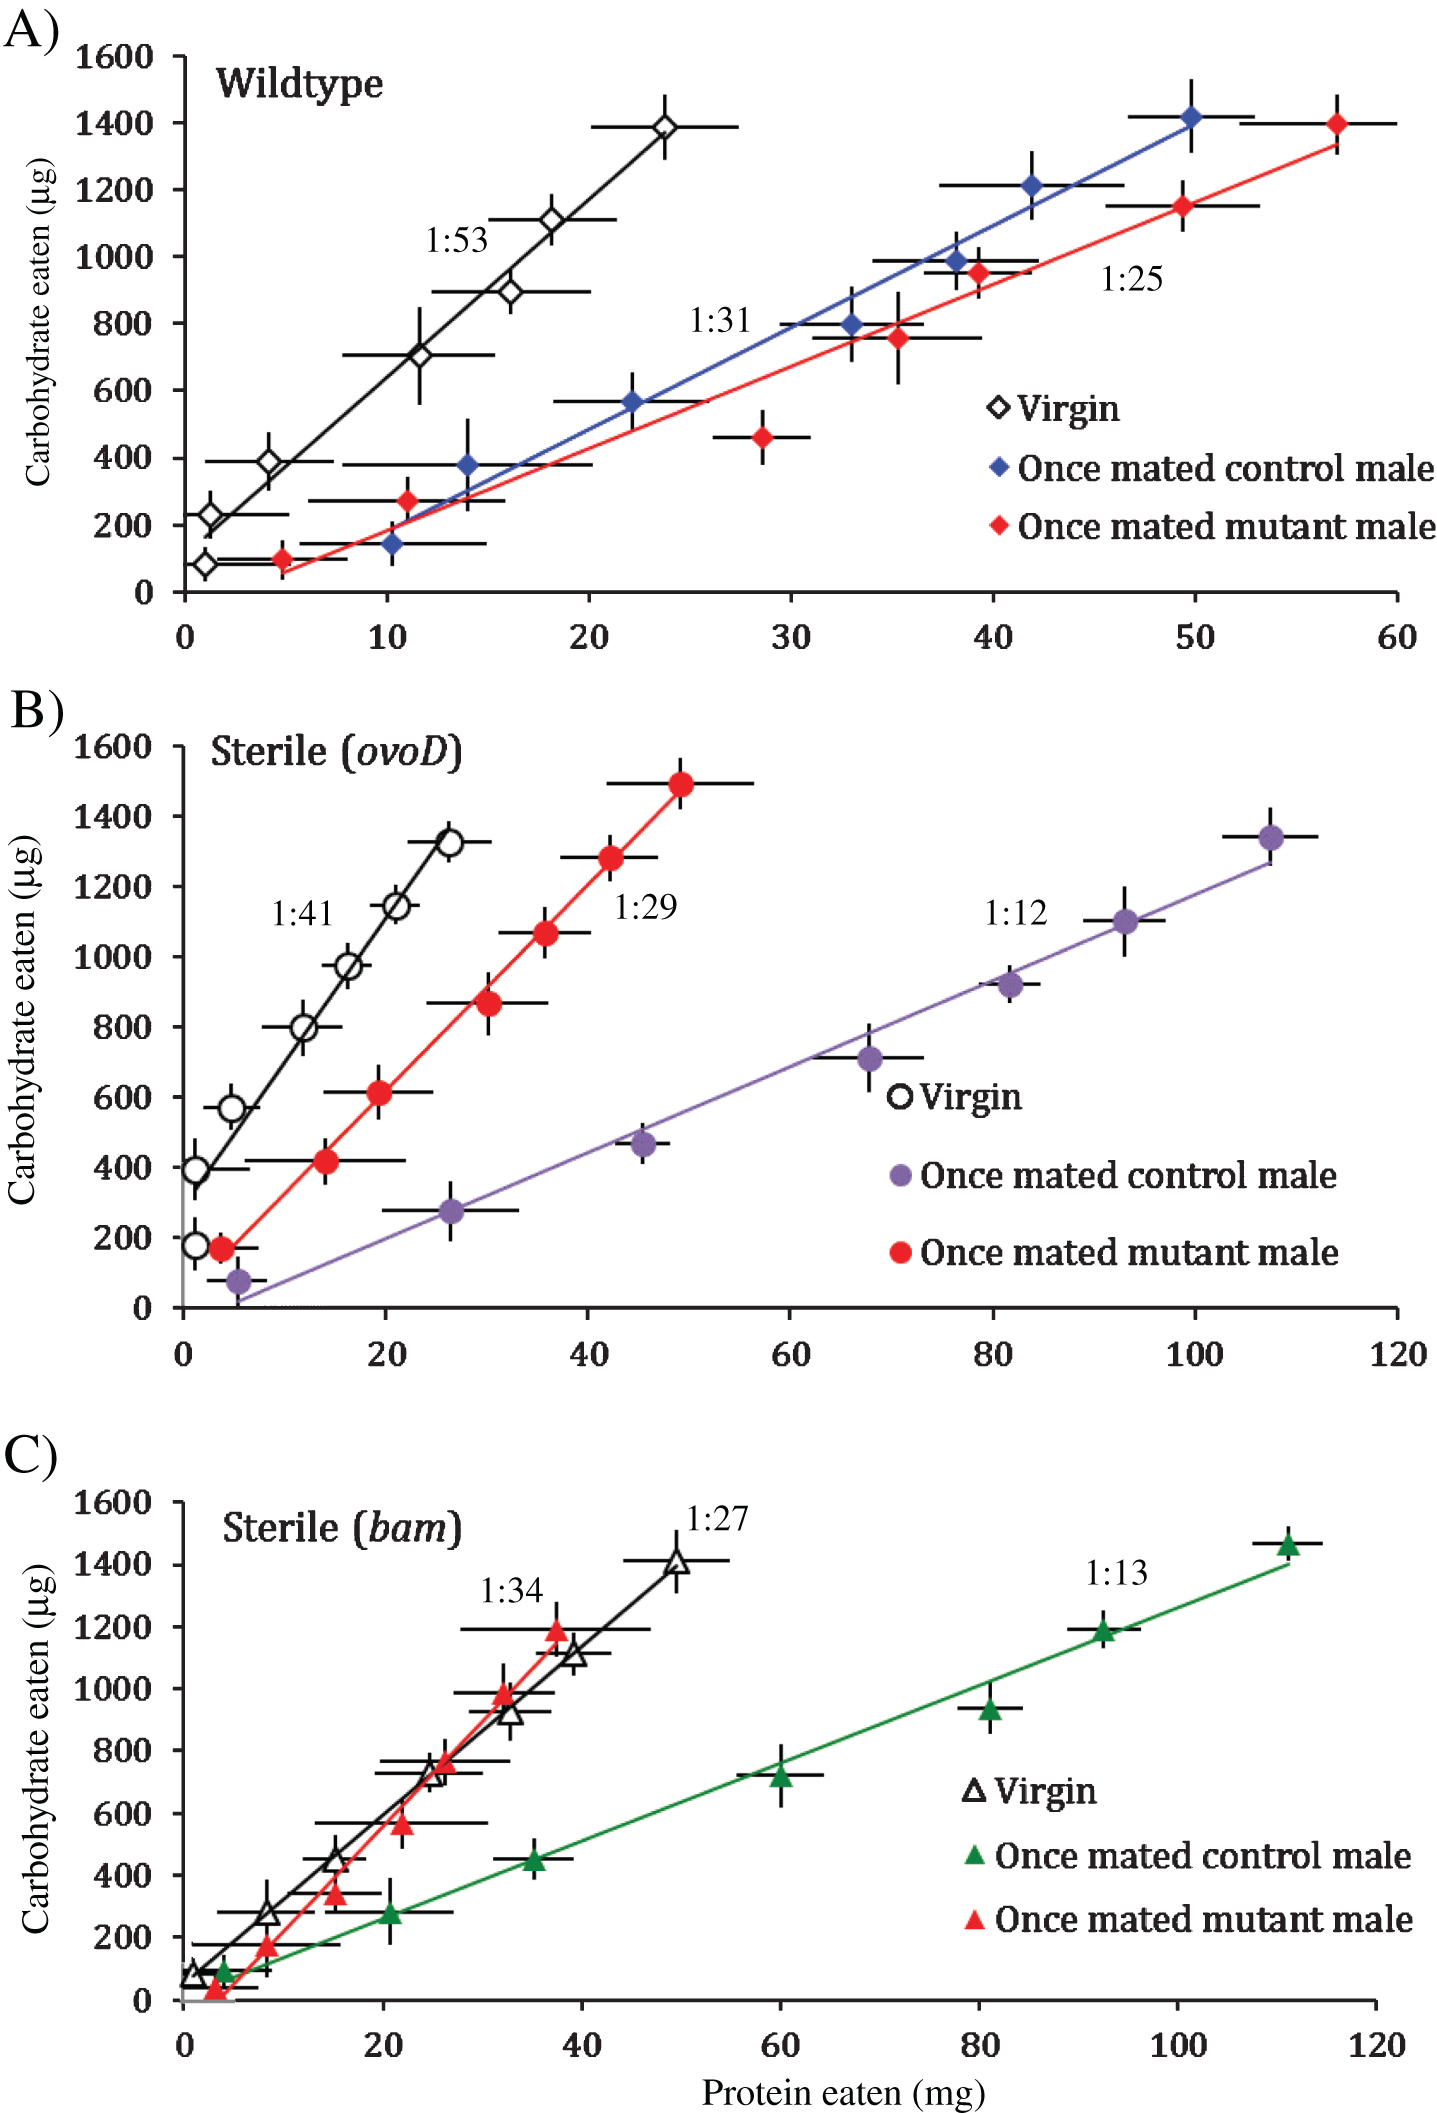 Wildtype fertile females (A), sterile OvoD females (B), sterile Bam females when unmated (virgin), or once-mated (at eclosion) to wildtype males (control) or to males lacking sex peptide SP0 (mutant) (C). Cumulative intake trajectories with daily point estimate standard deviation, using 2-day census intervals, and best-fit linear function, with P:C ratios (at legend) estimated from linear regression.